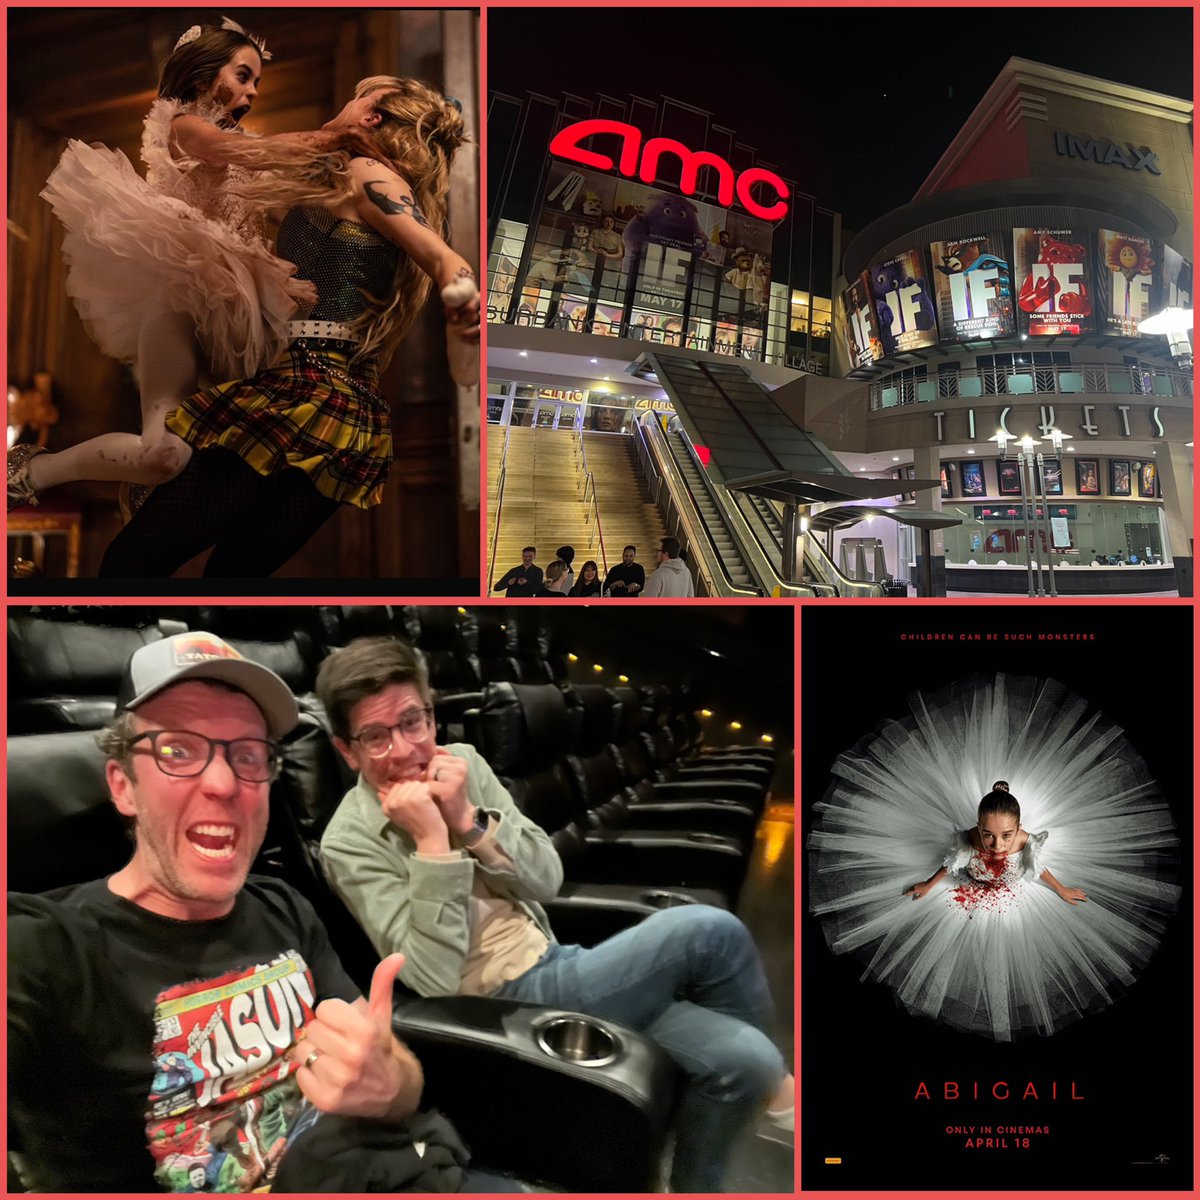 Why aren’t more people seeing #AbigailTheMovie in theaters?? It’s bloody AF, hilarious, suspenseful & a genuinely great time at the movies! #RadioSilence knocks another horror/comedy flick out of the park & they bring literal BUCKETS of blood to the screen 🧛‍♀️🩸